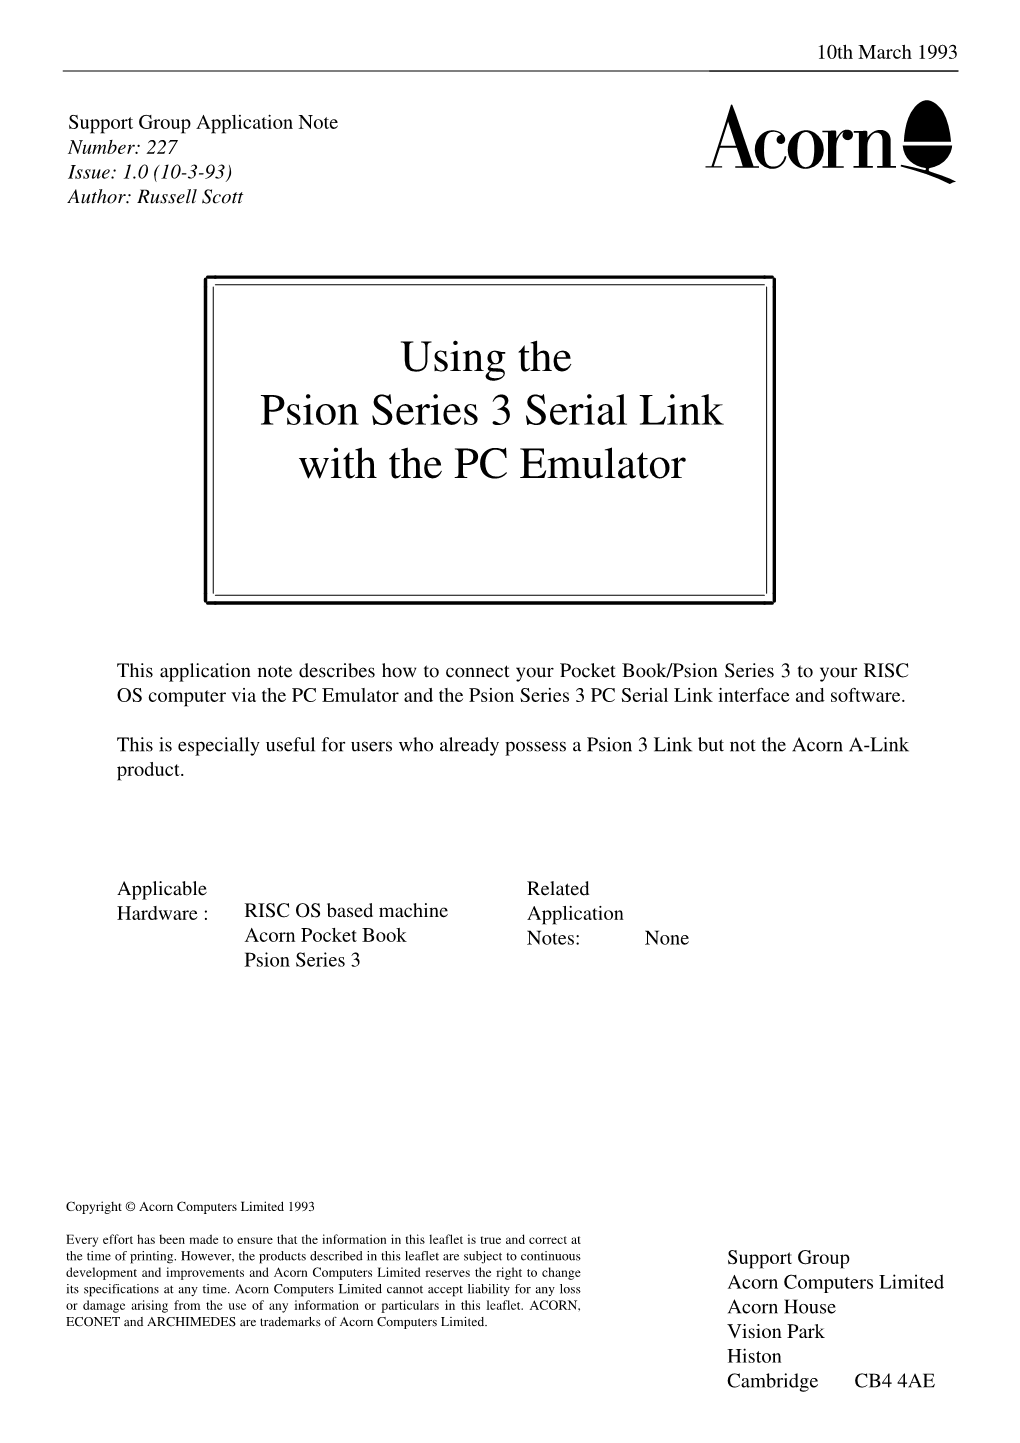 Using the Psion Series 3 Serial Link with the PC Emulator